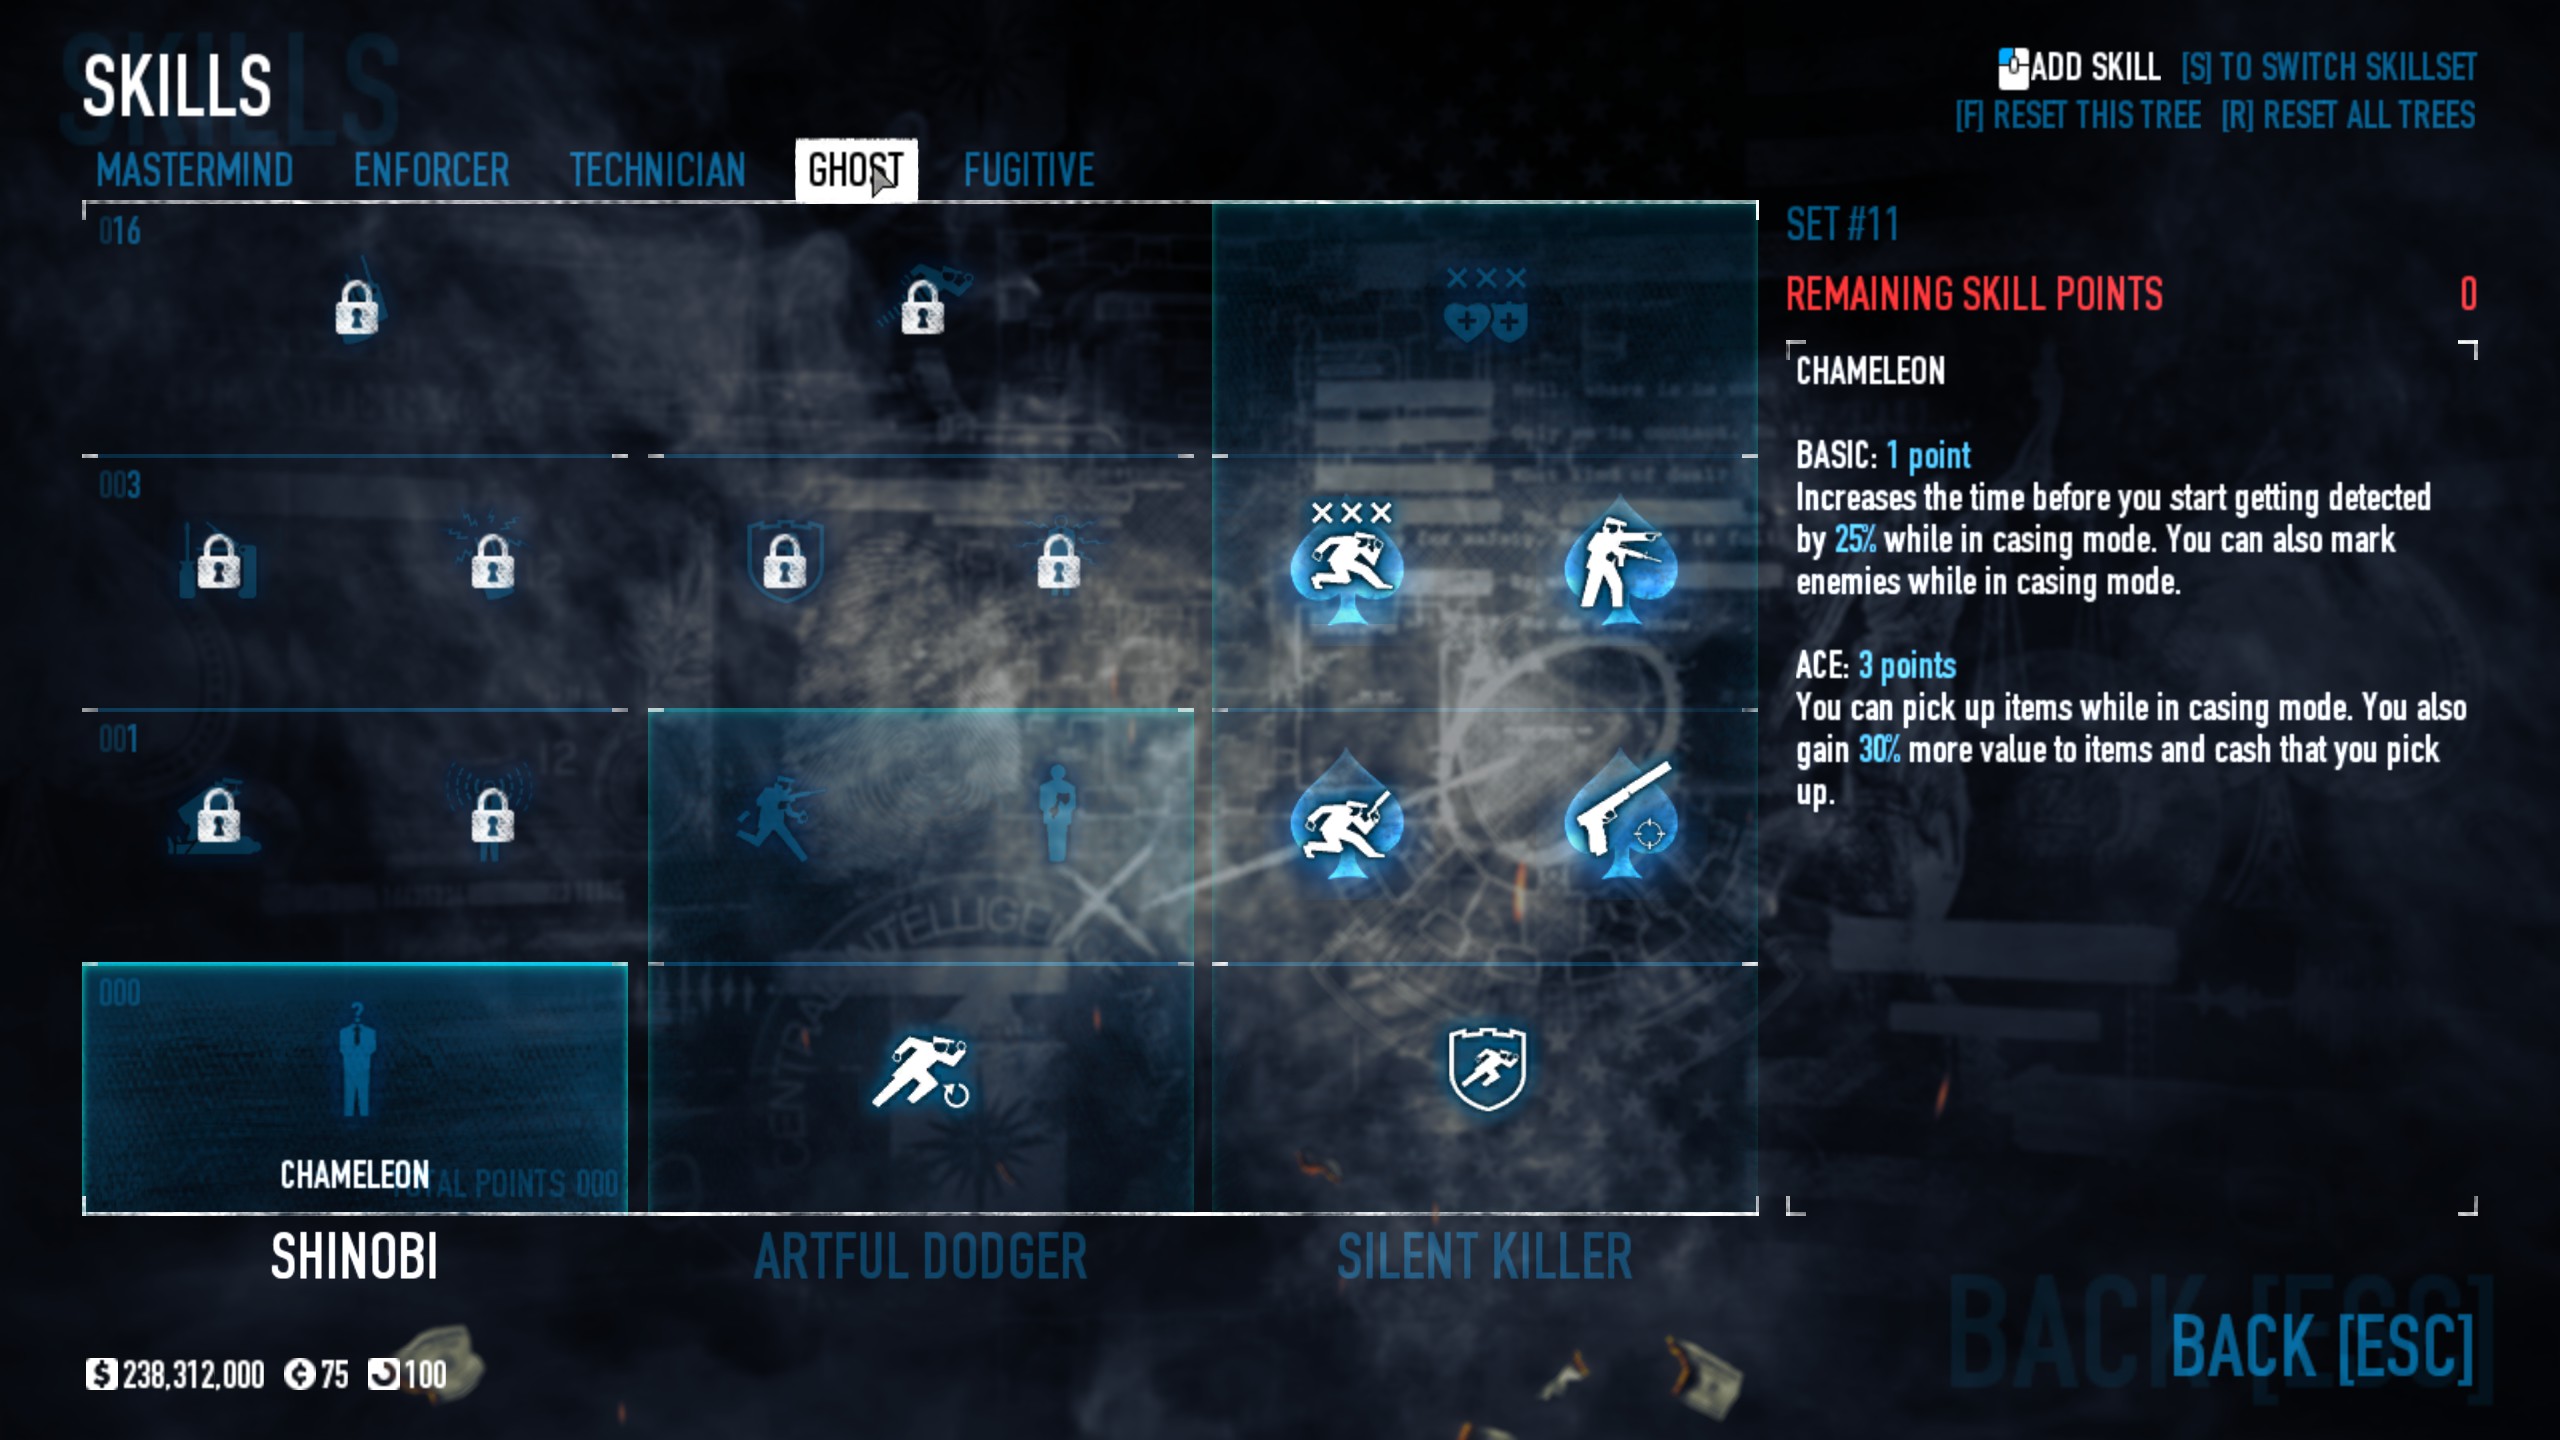 PAYDAY 2 Best SMG Build for Anarchist - -Skills, Chapter Two- - 64DA418